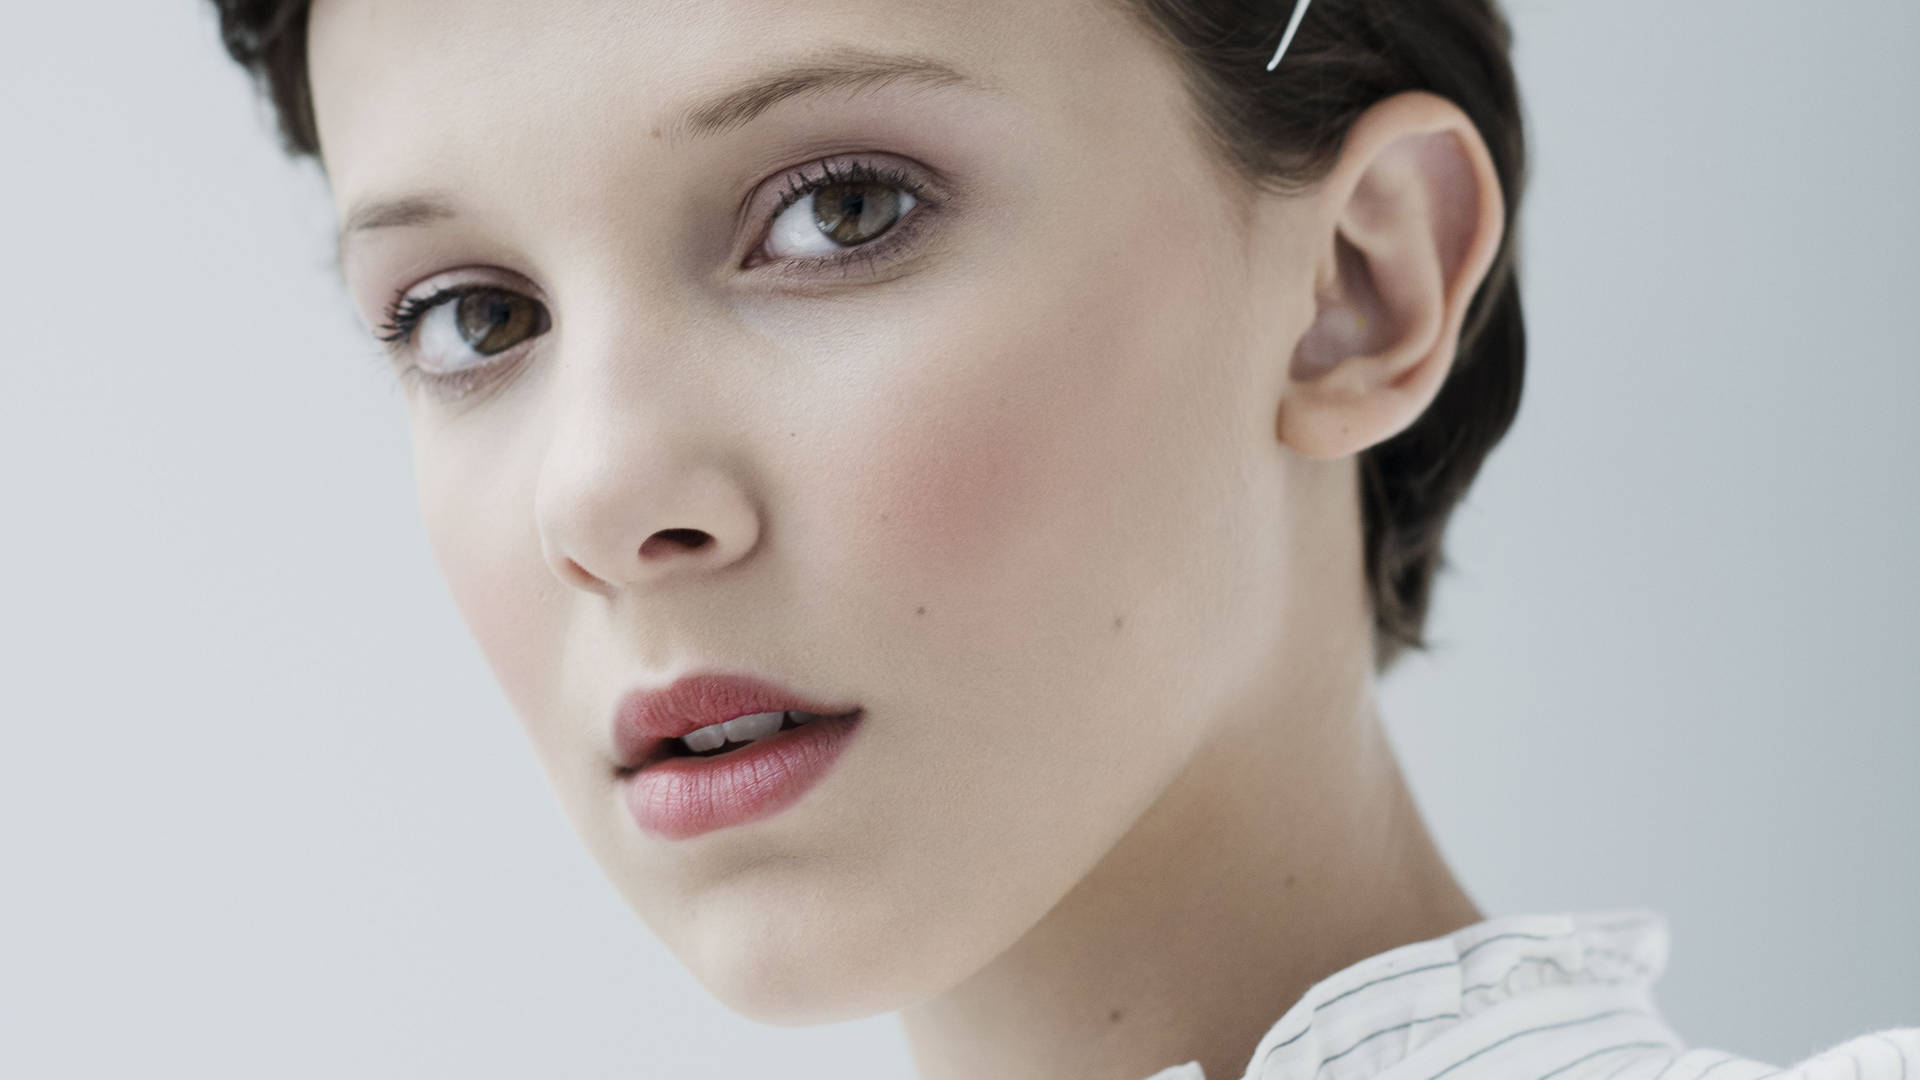 Millie Bobby Brown - The Rising Star Background